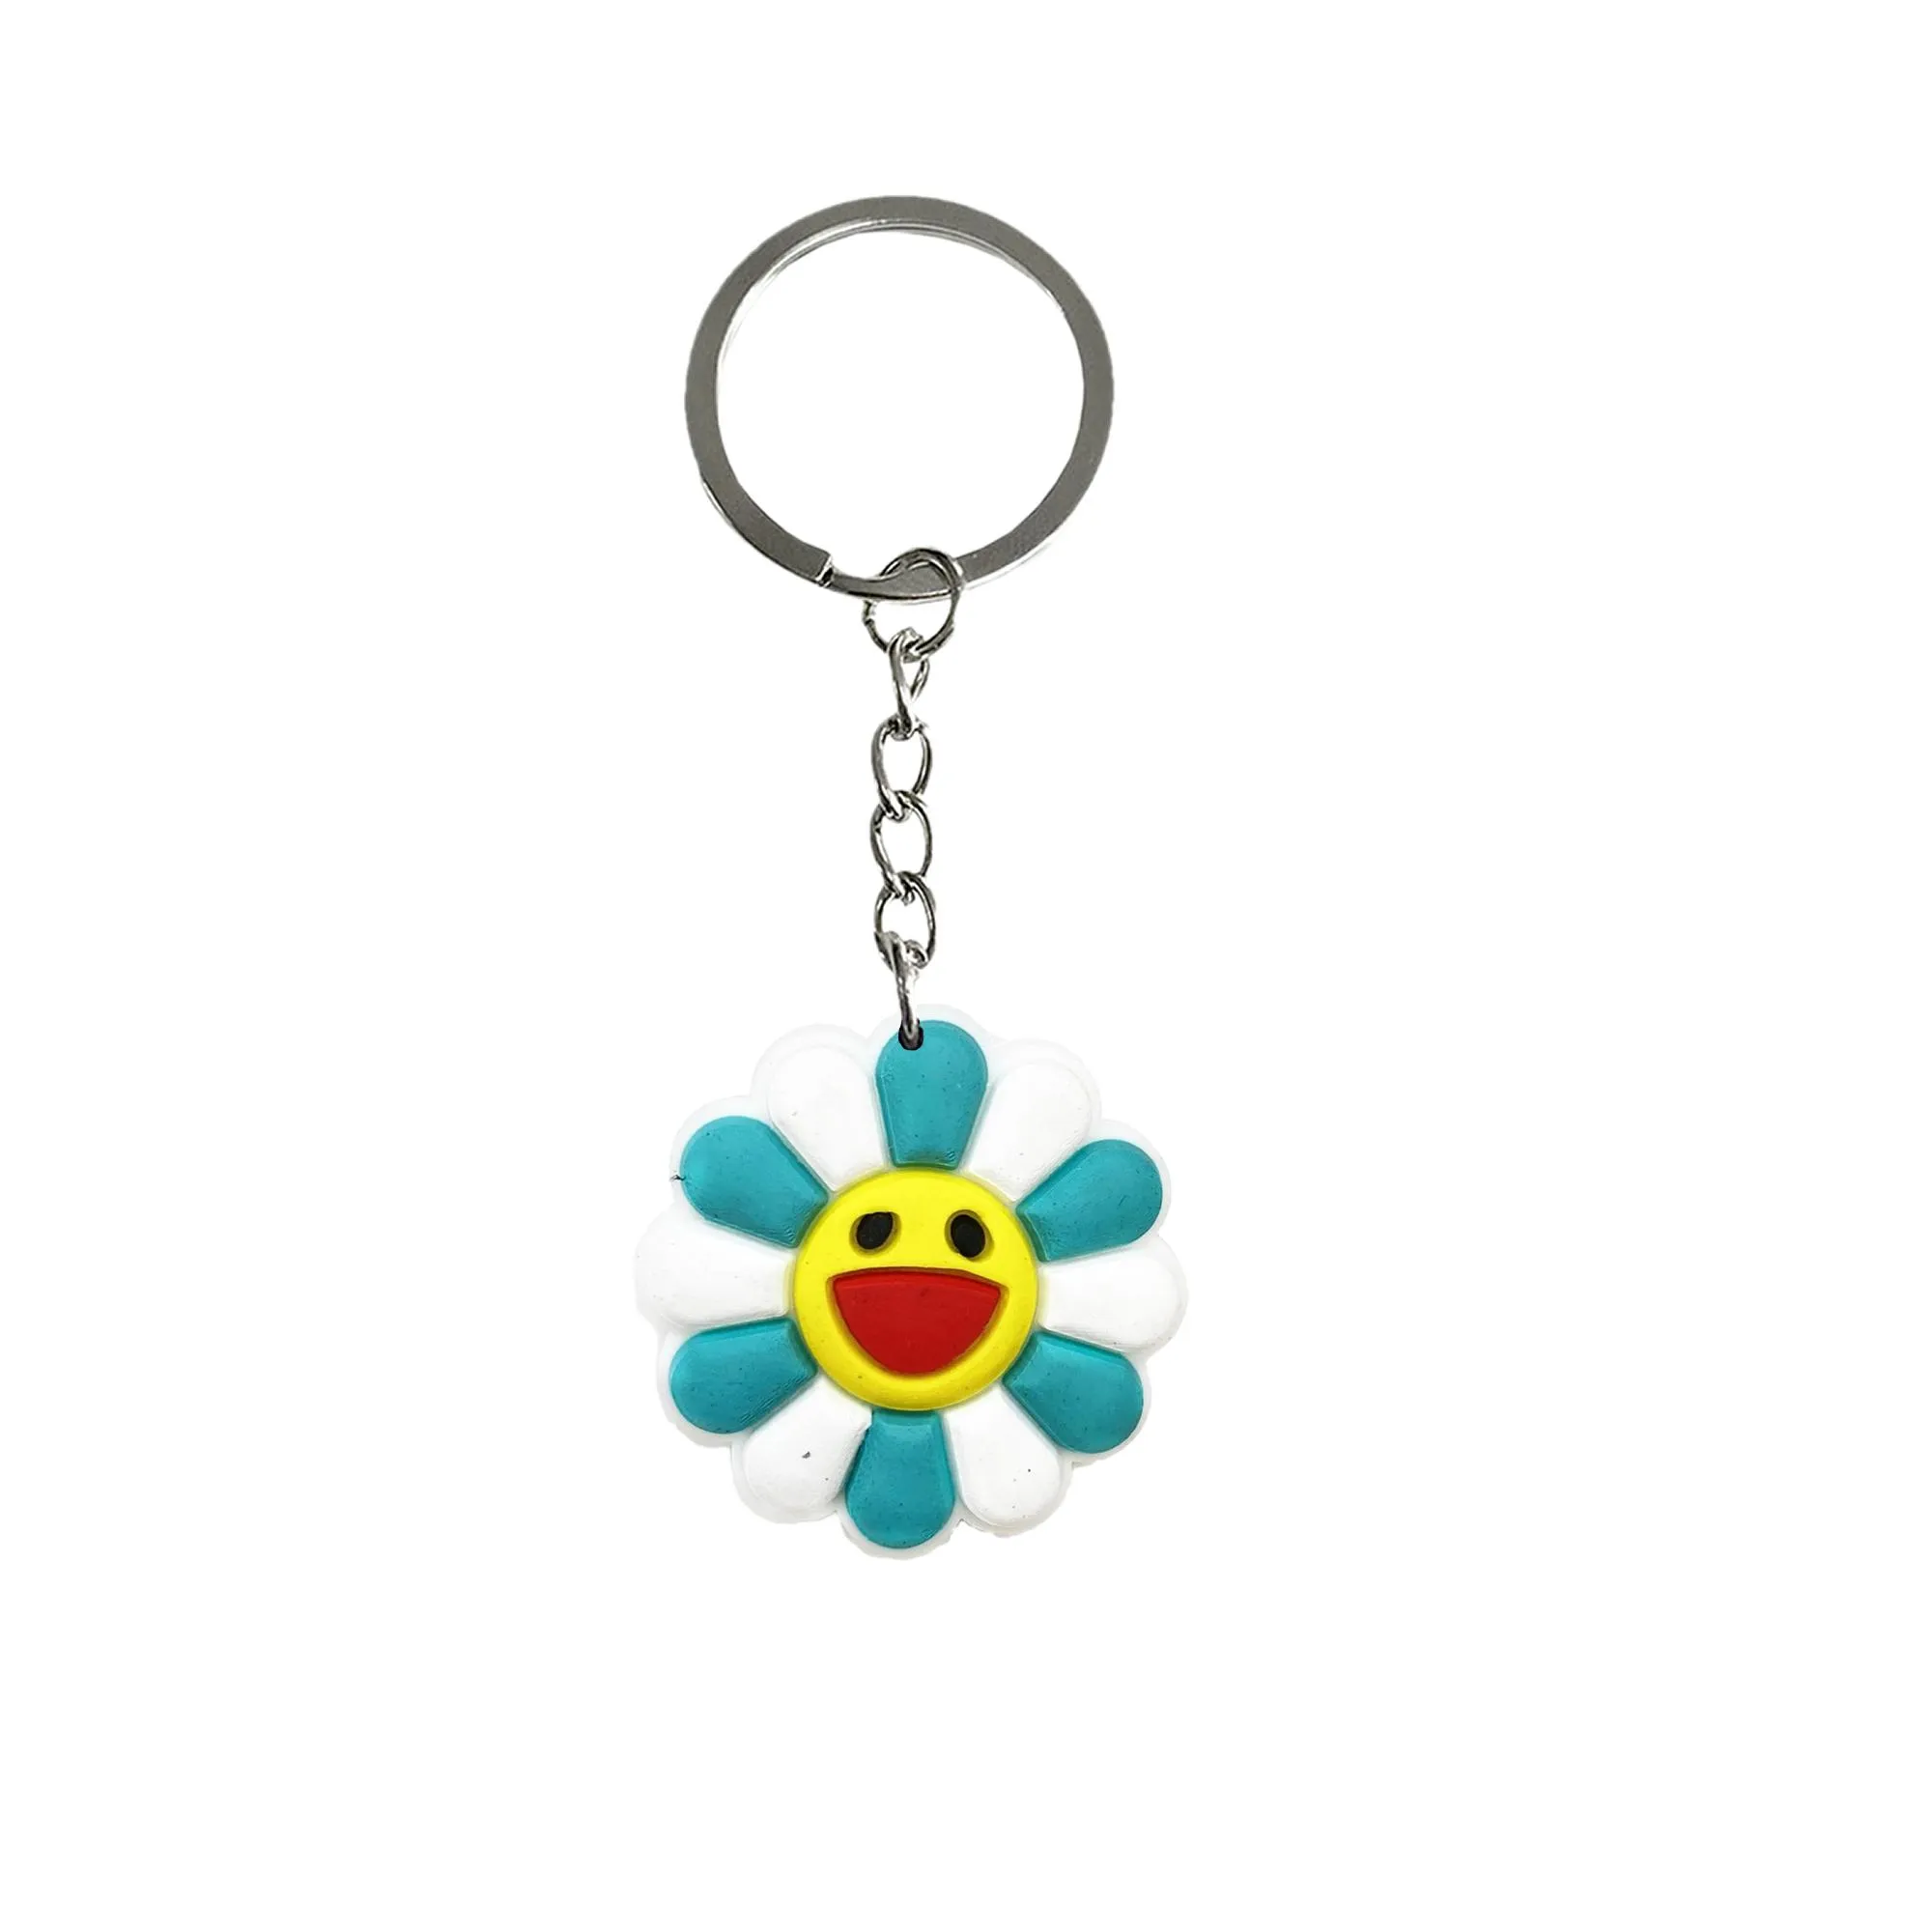 sunflower 30 keychain keychains for school day birthday party supplies gift classroom prizes tags goodie bag stuffer christmas gifts and holiday charms keyring suitable schoolbag boys women anime cool backpacks